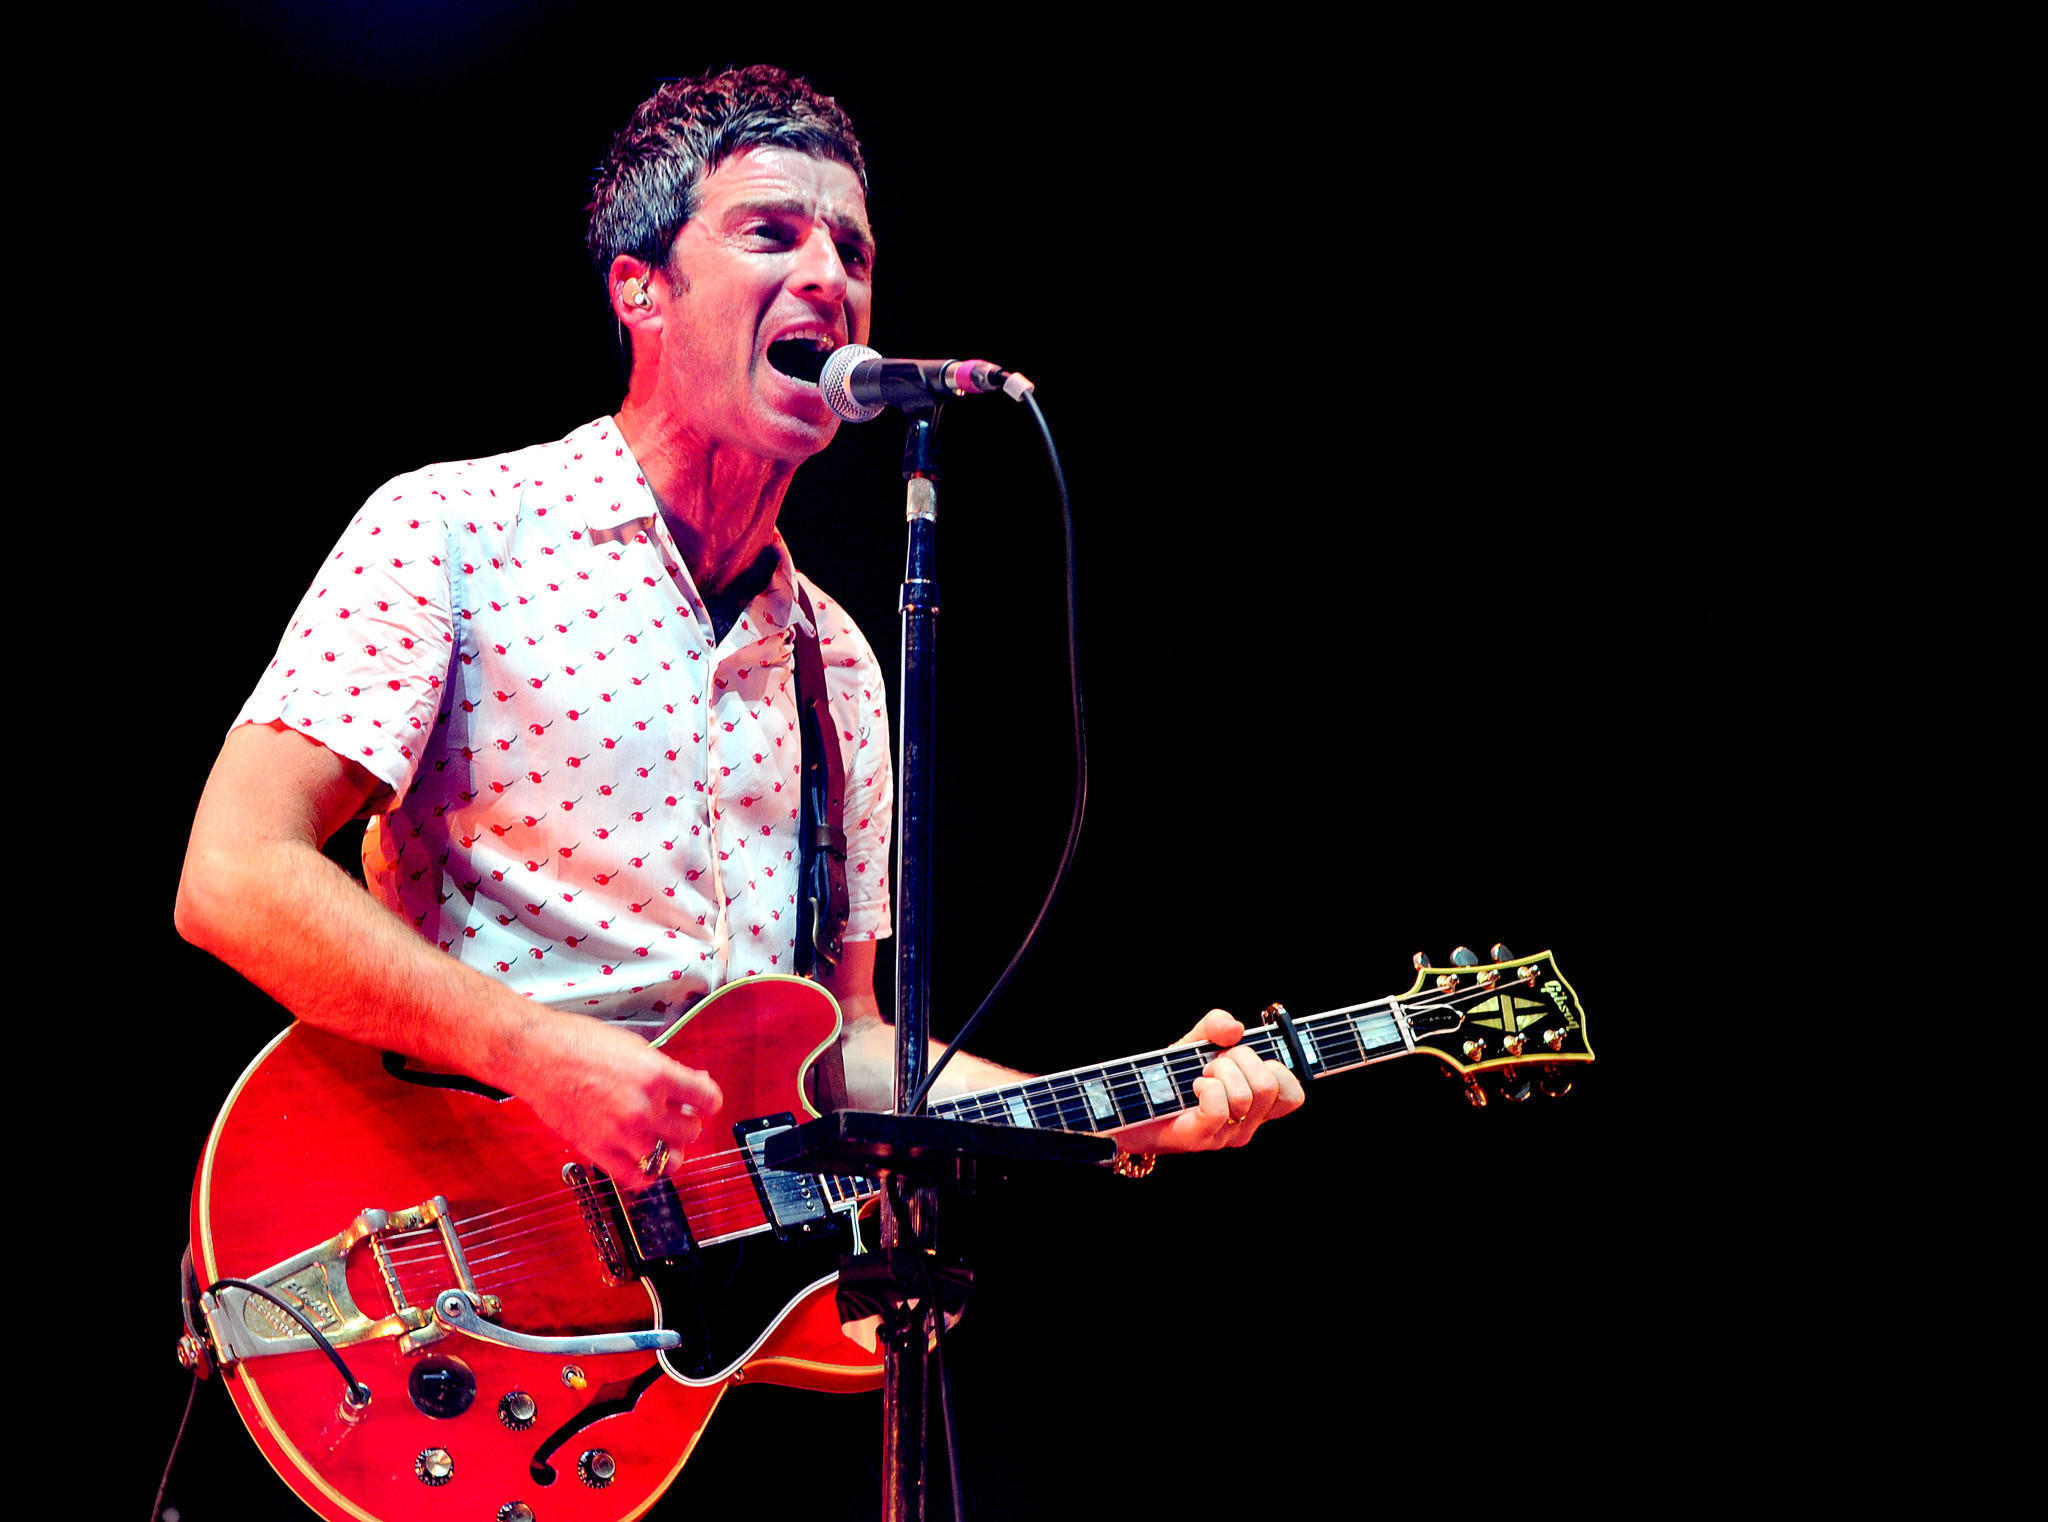 Noel Gallagher gets emotional at first Manchester Arena show since bombing - LA Times2048 x 1522